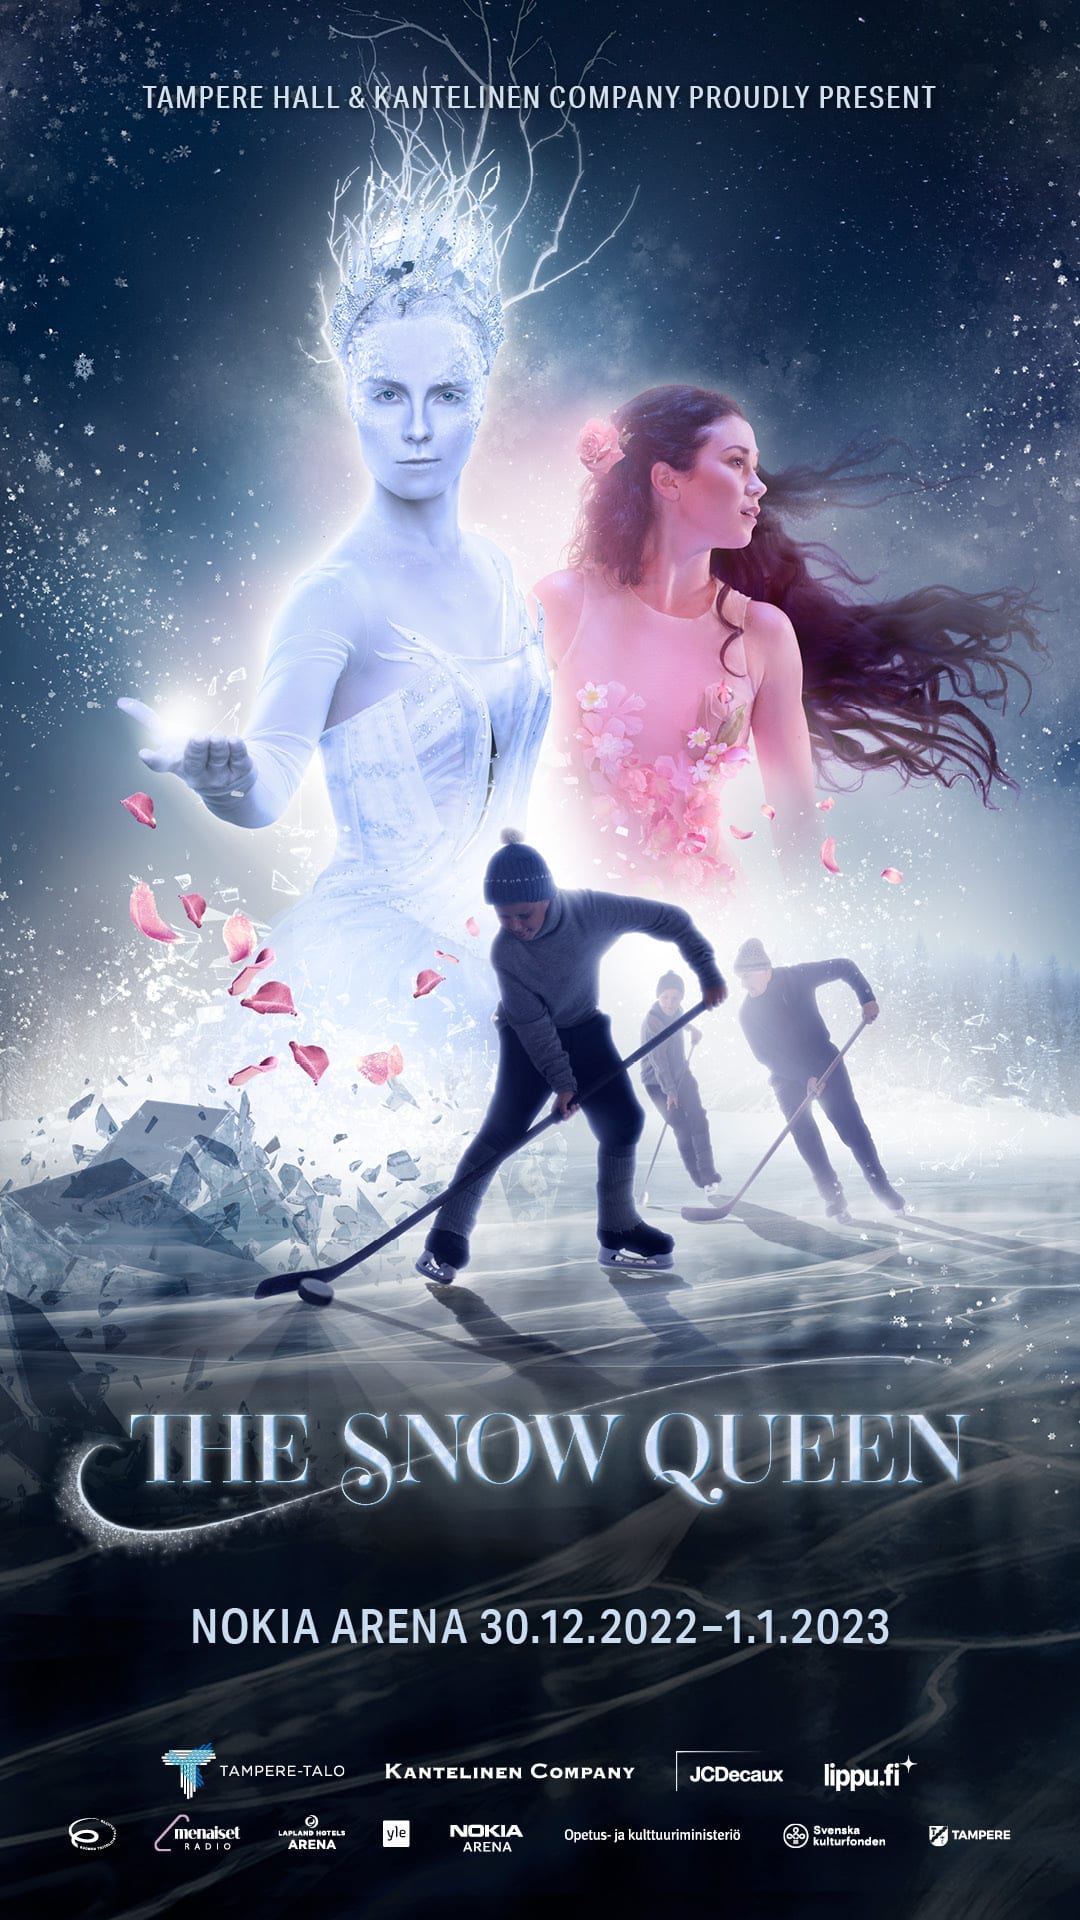 The new Finnish ice ballet extravaganza The Snow Queen is based on the magical fairytale by H. C. Andersen.